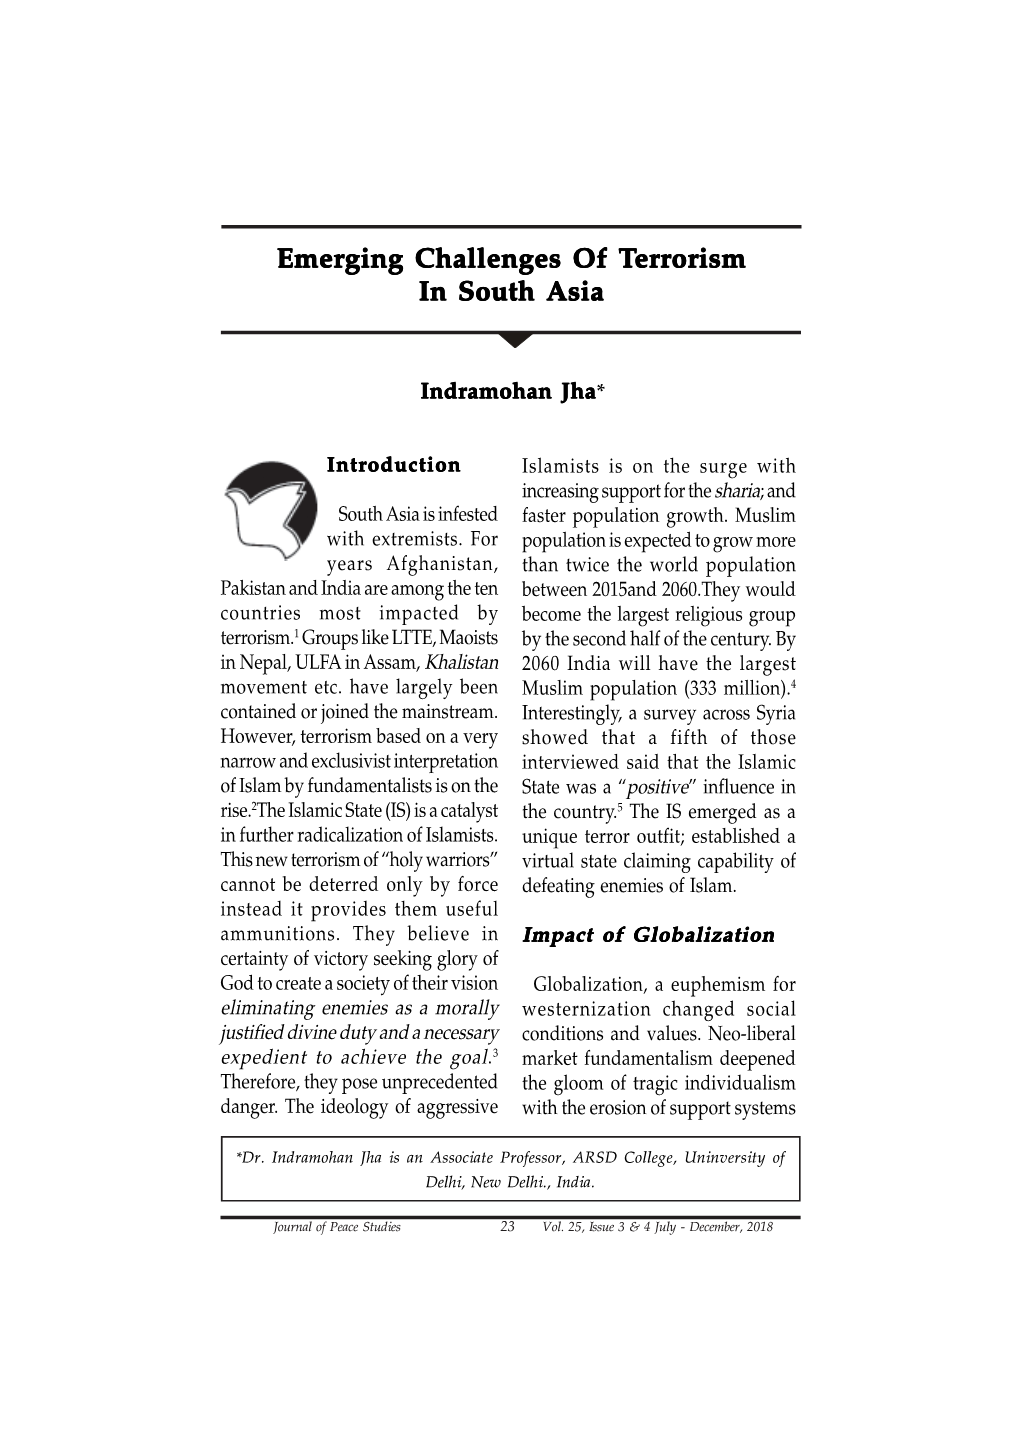 Emerging Challenges of Terrorism in South Asia